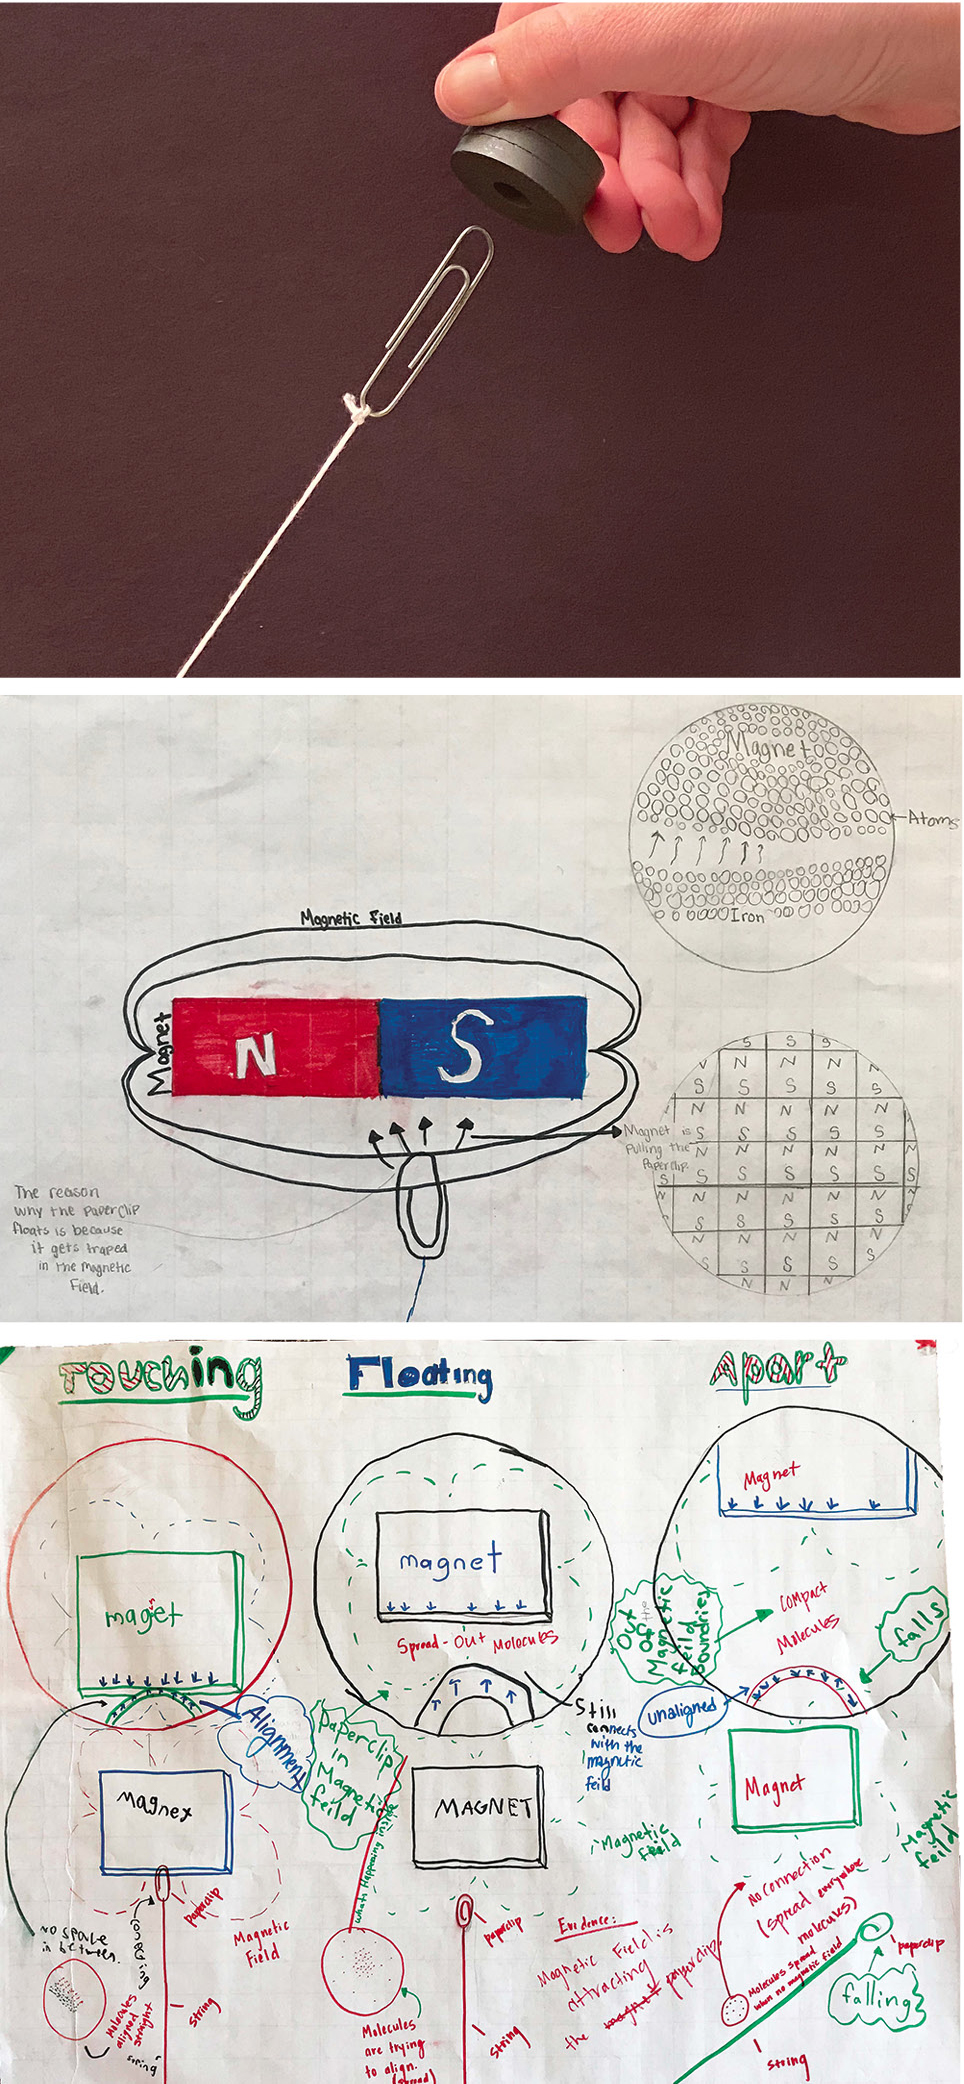 Figure 1 Floating paper clip phenomenon and example model: (A) the floating paper clip phenomenon; (B) example of student model showing “zoom in” bubbles; (C) example of student model showing three views of the phenomenon (the paper clip touching the magnet, near the magnet but not touching, and far away from the magnet).